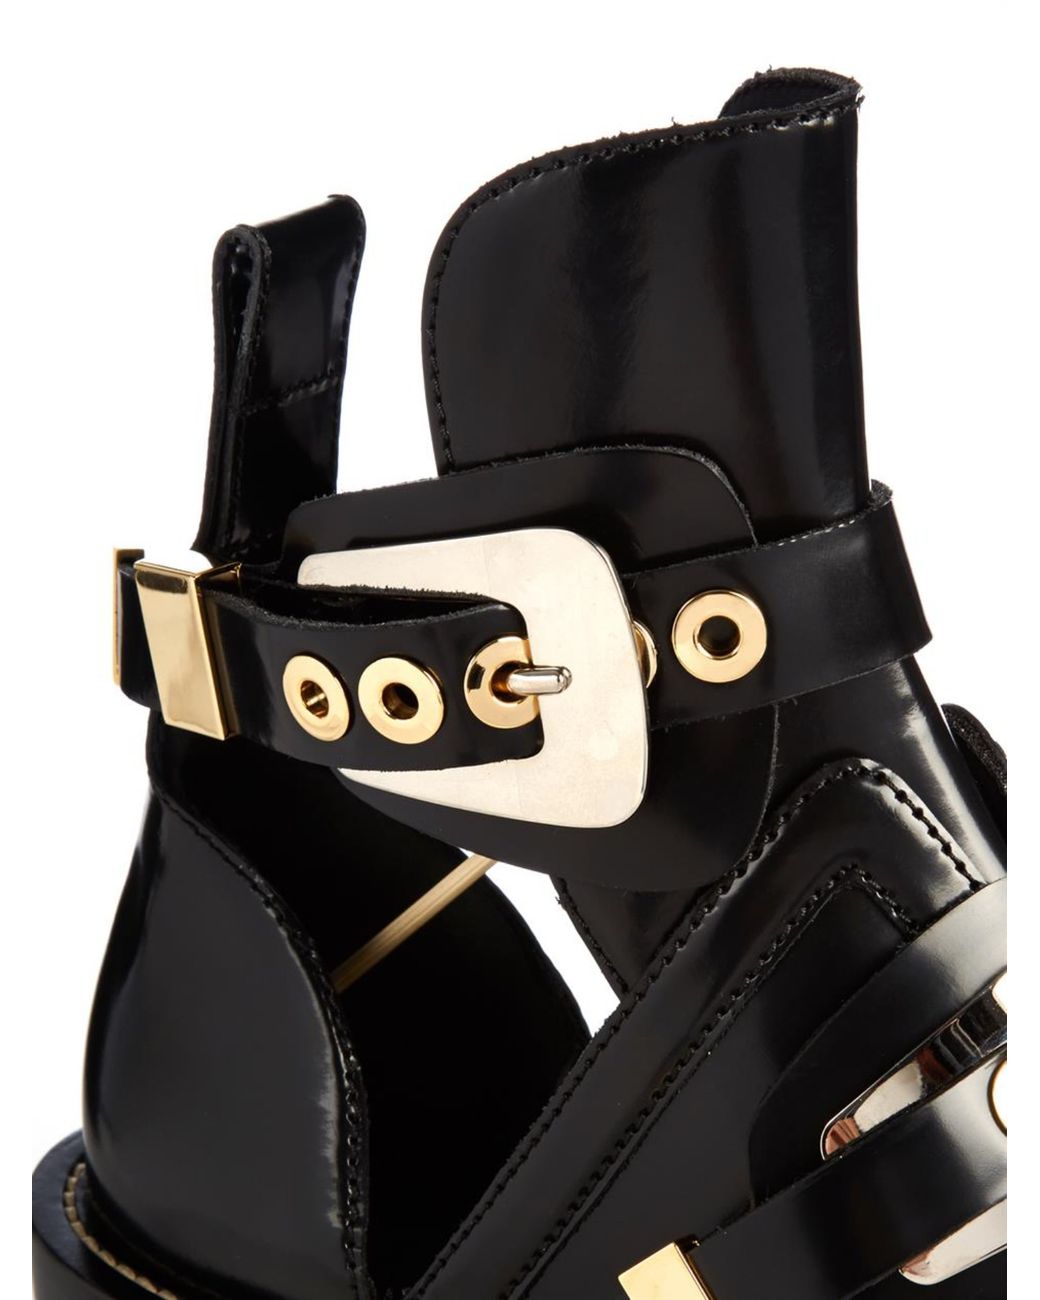 Ceinture Cut-out Leather Ankle Boots in Black | Lyst